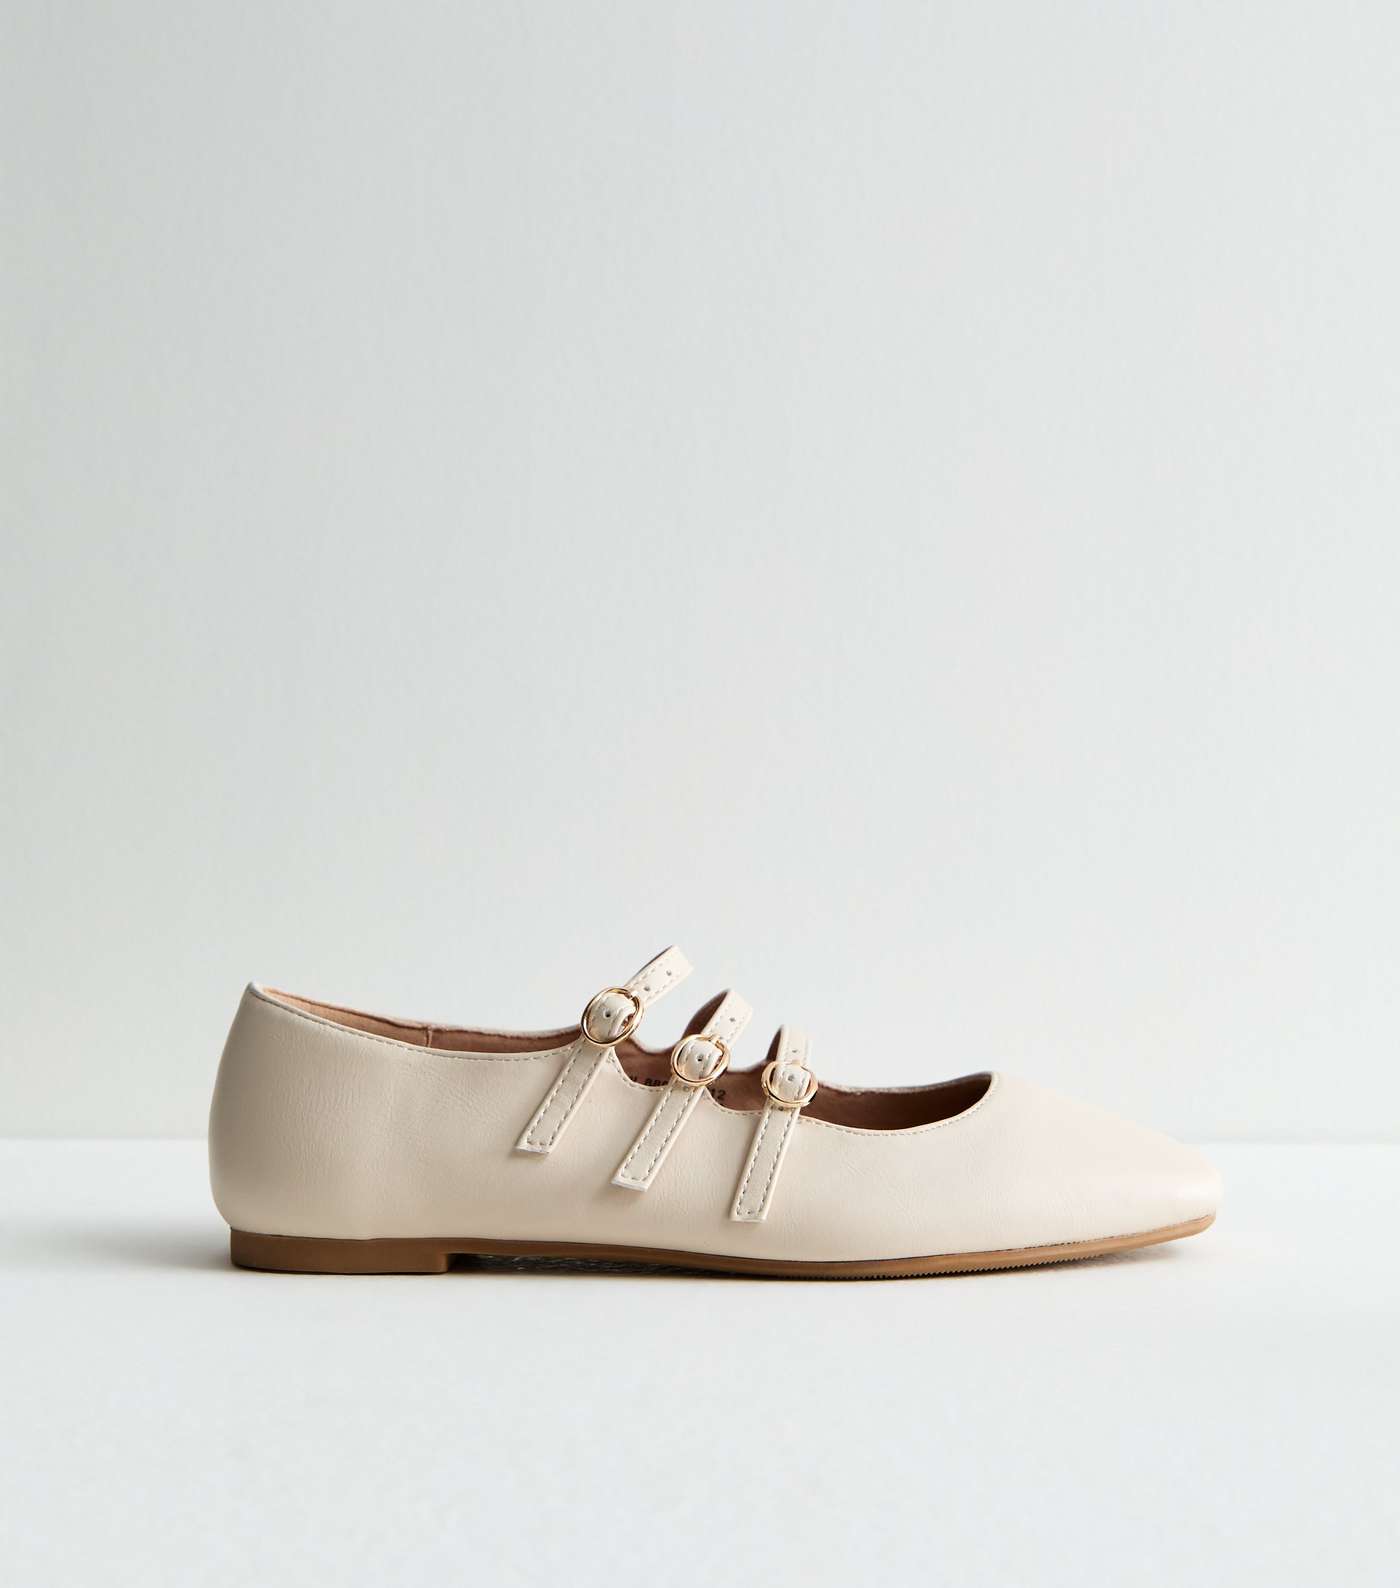 Off White Triple Strap Mary Jane Flats Image 3